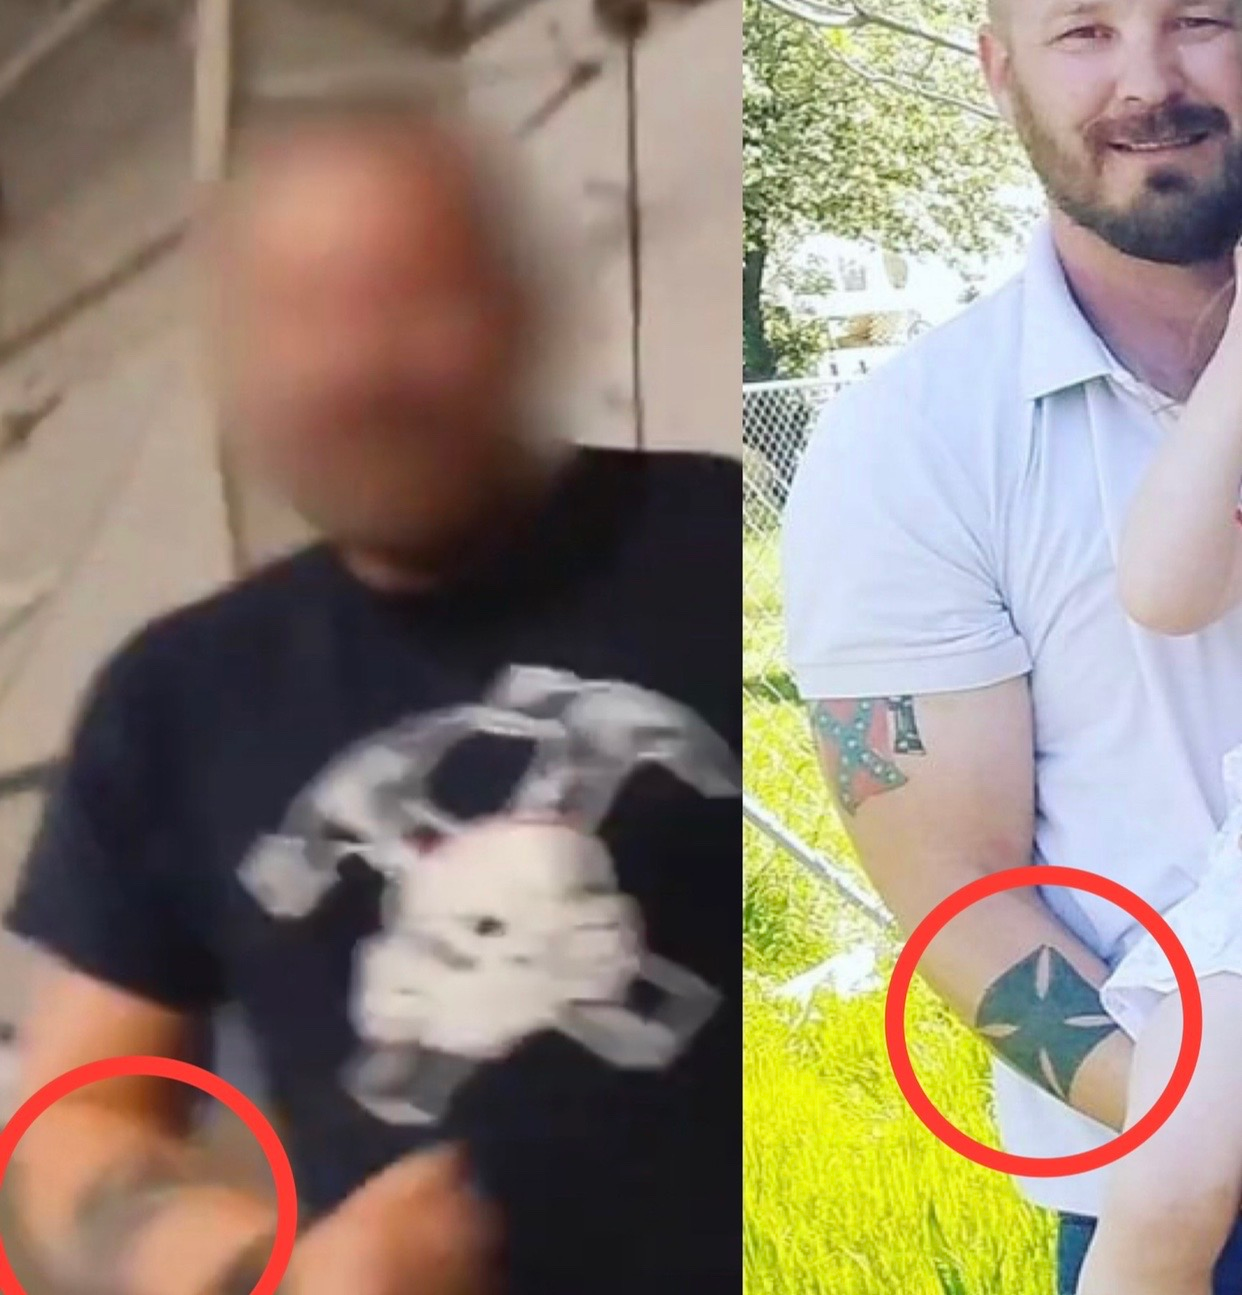 Two pics of Robert Harris with iron cross and confederate flag tats showing